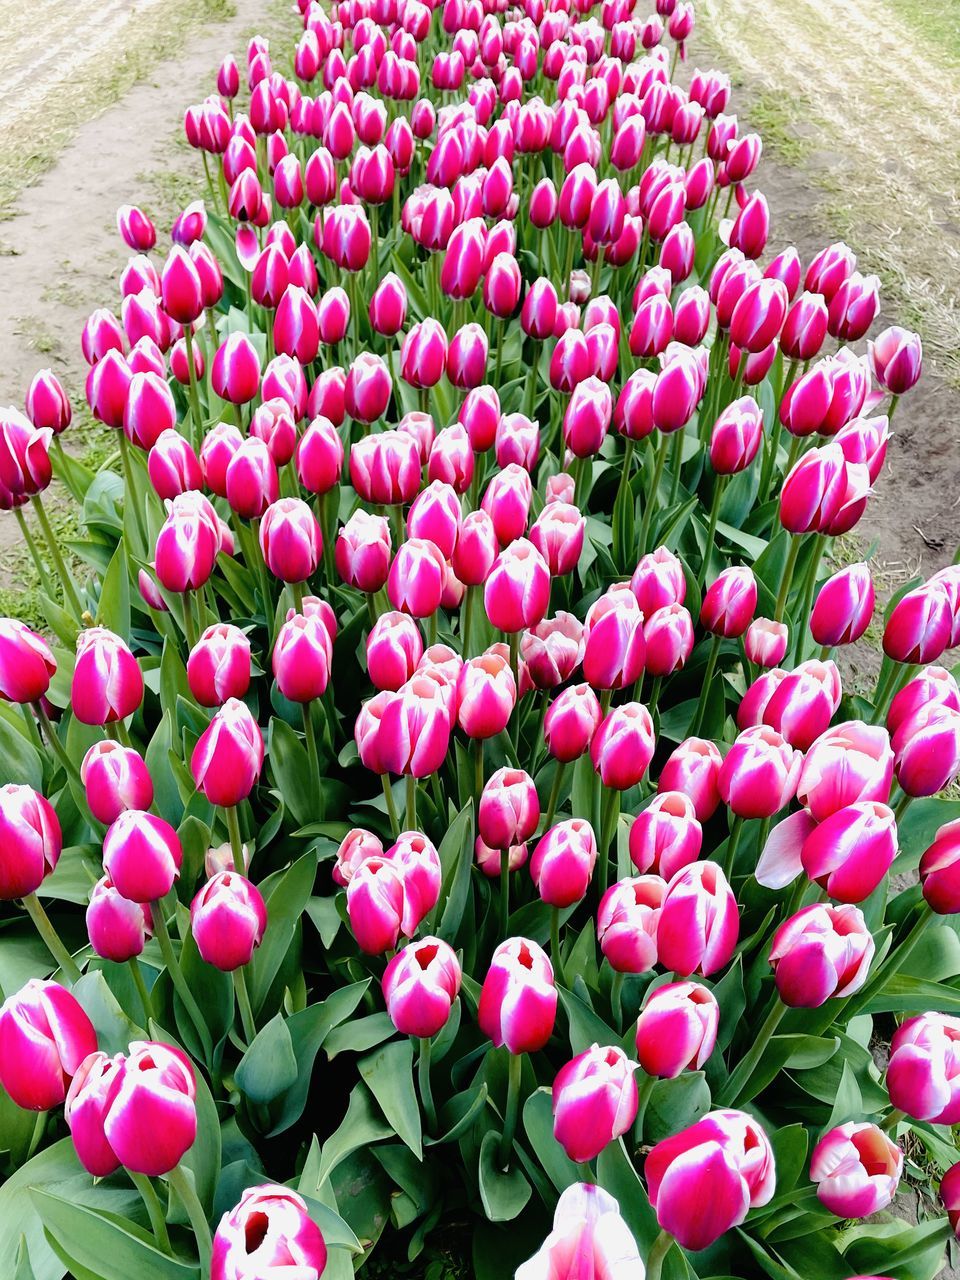 HIGH ANGLE VIEW OF PINK TULIPS